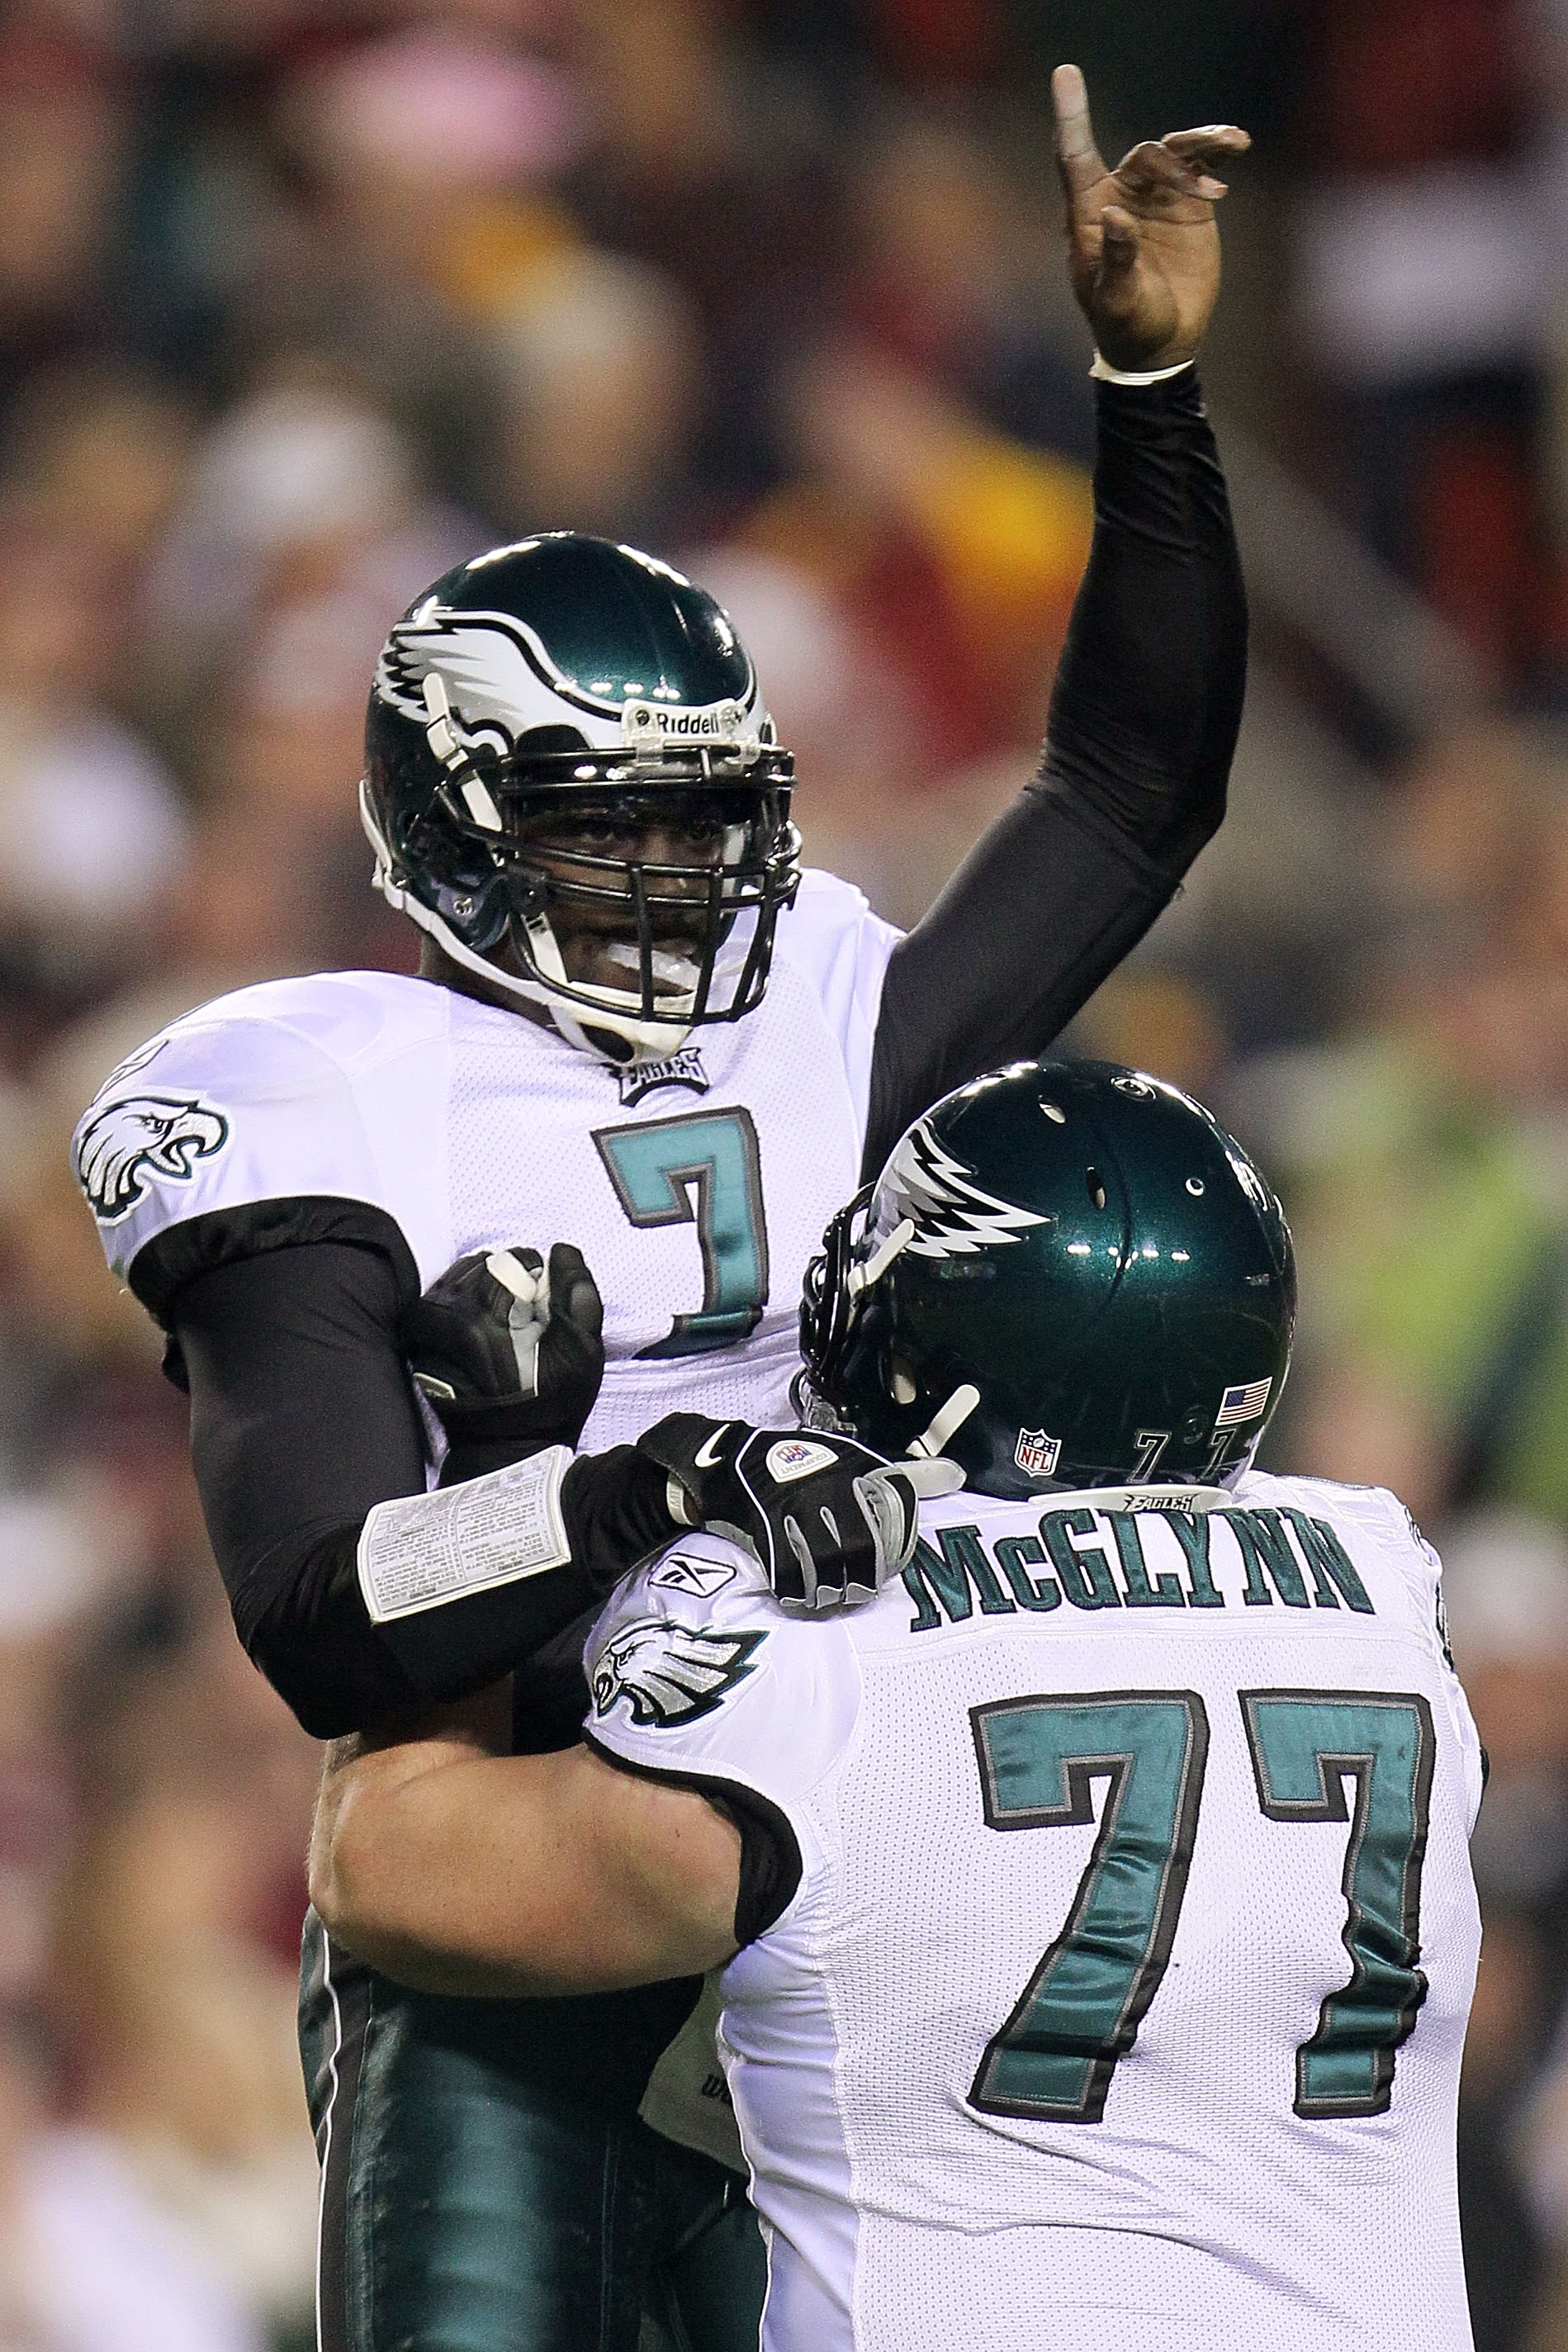 LANDOVER, MD - NOVEMBER 15:  Michael Vick #7 of the Philadelphia Eagles celebrates with team mate Mike McGlynn #77 after throwing his teams first touchdown against the Washington Redskins on November 15, 2010 at FedExField in Landover, Maryland.  (Photo b